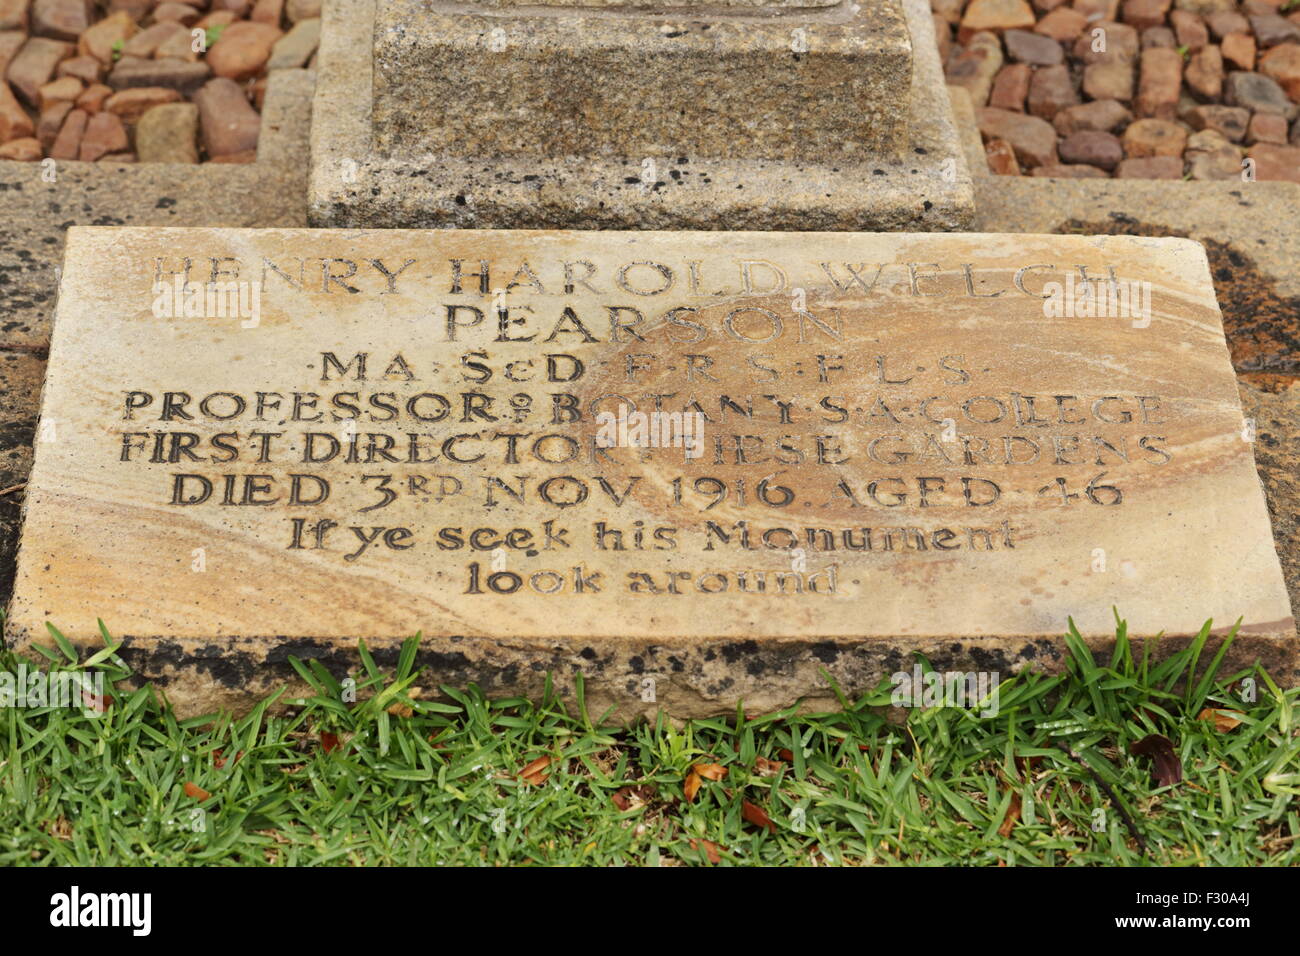 Headstone of the grave of Henry Pearson, a South African botanist, in Kirstenbosch  National Botanical Gardens, Cape Town Stock Photo